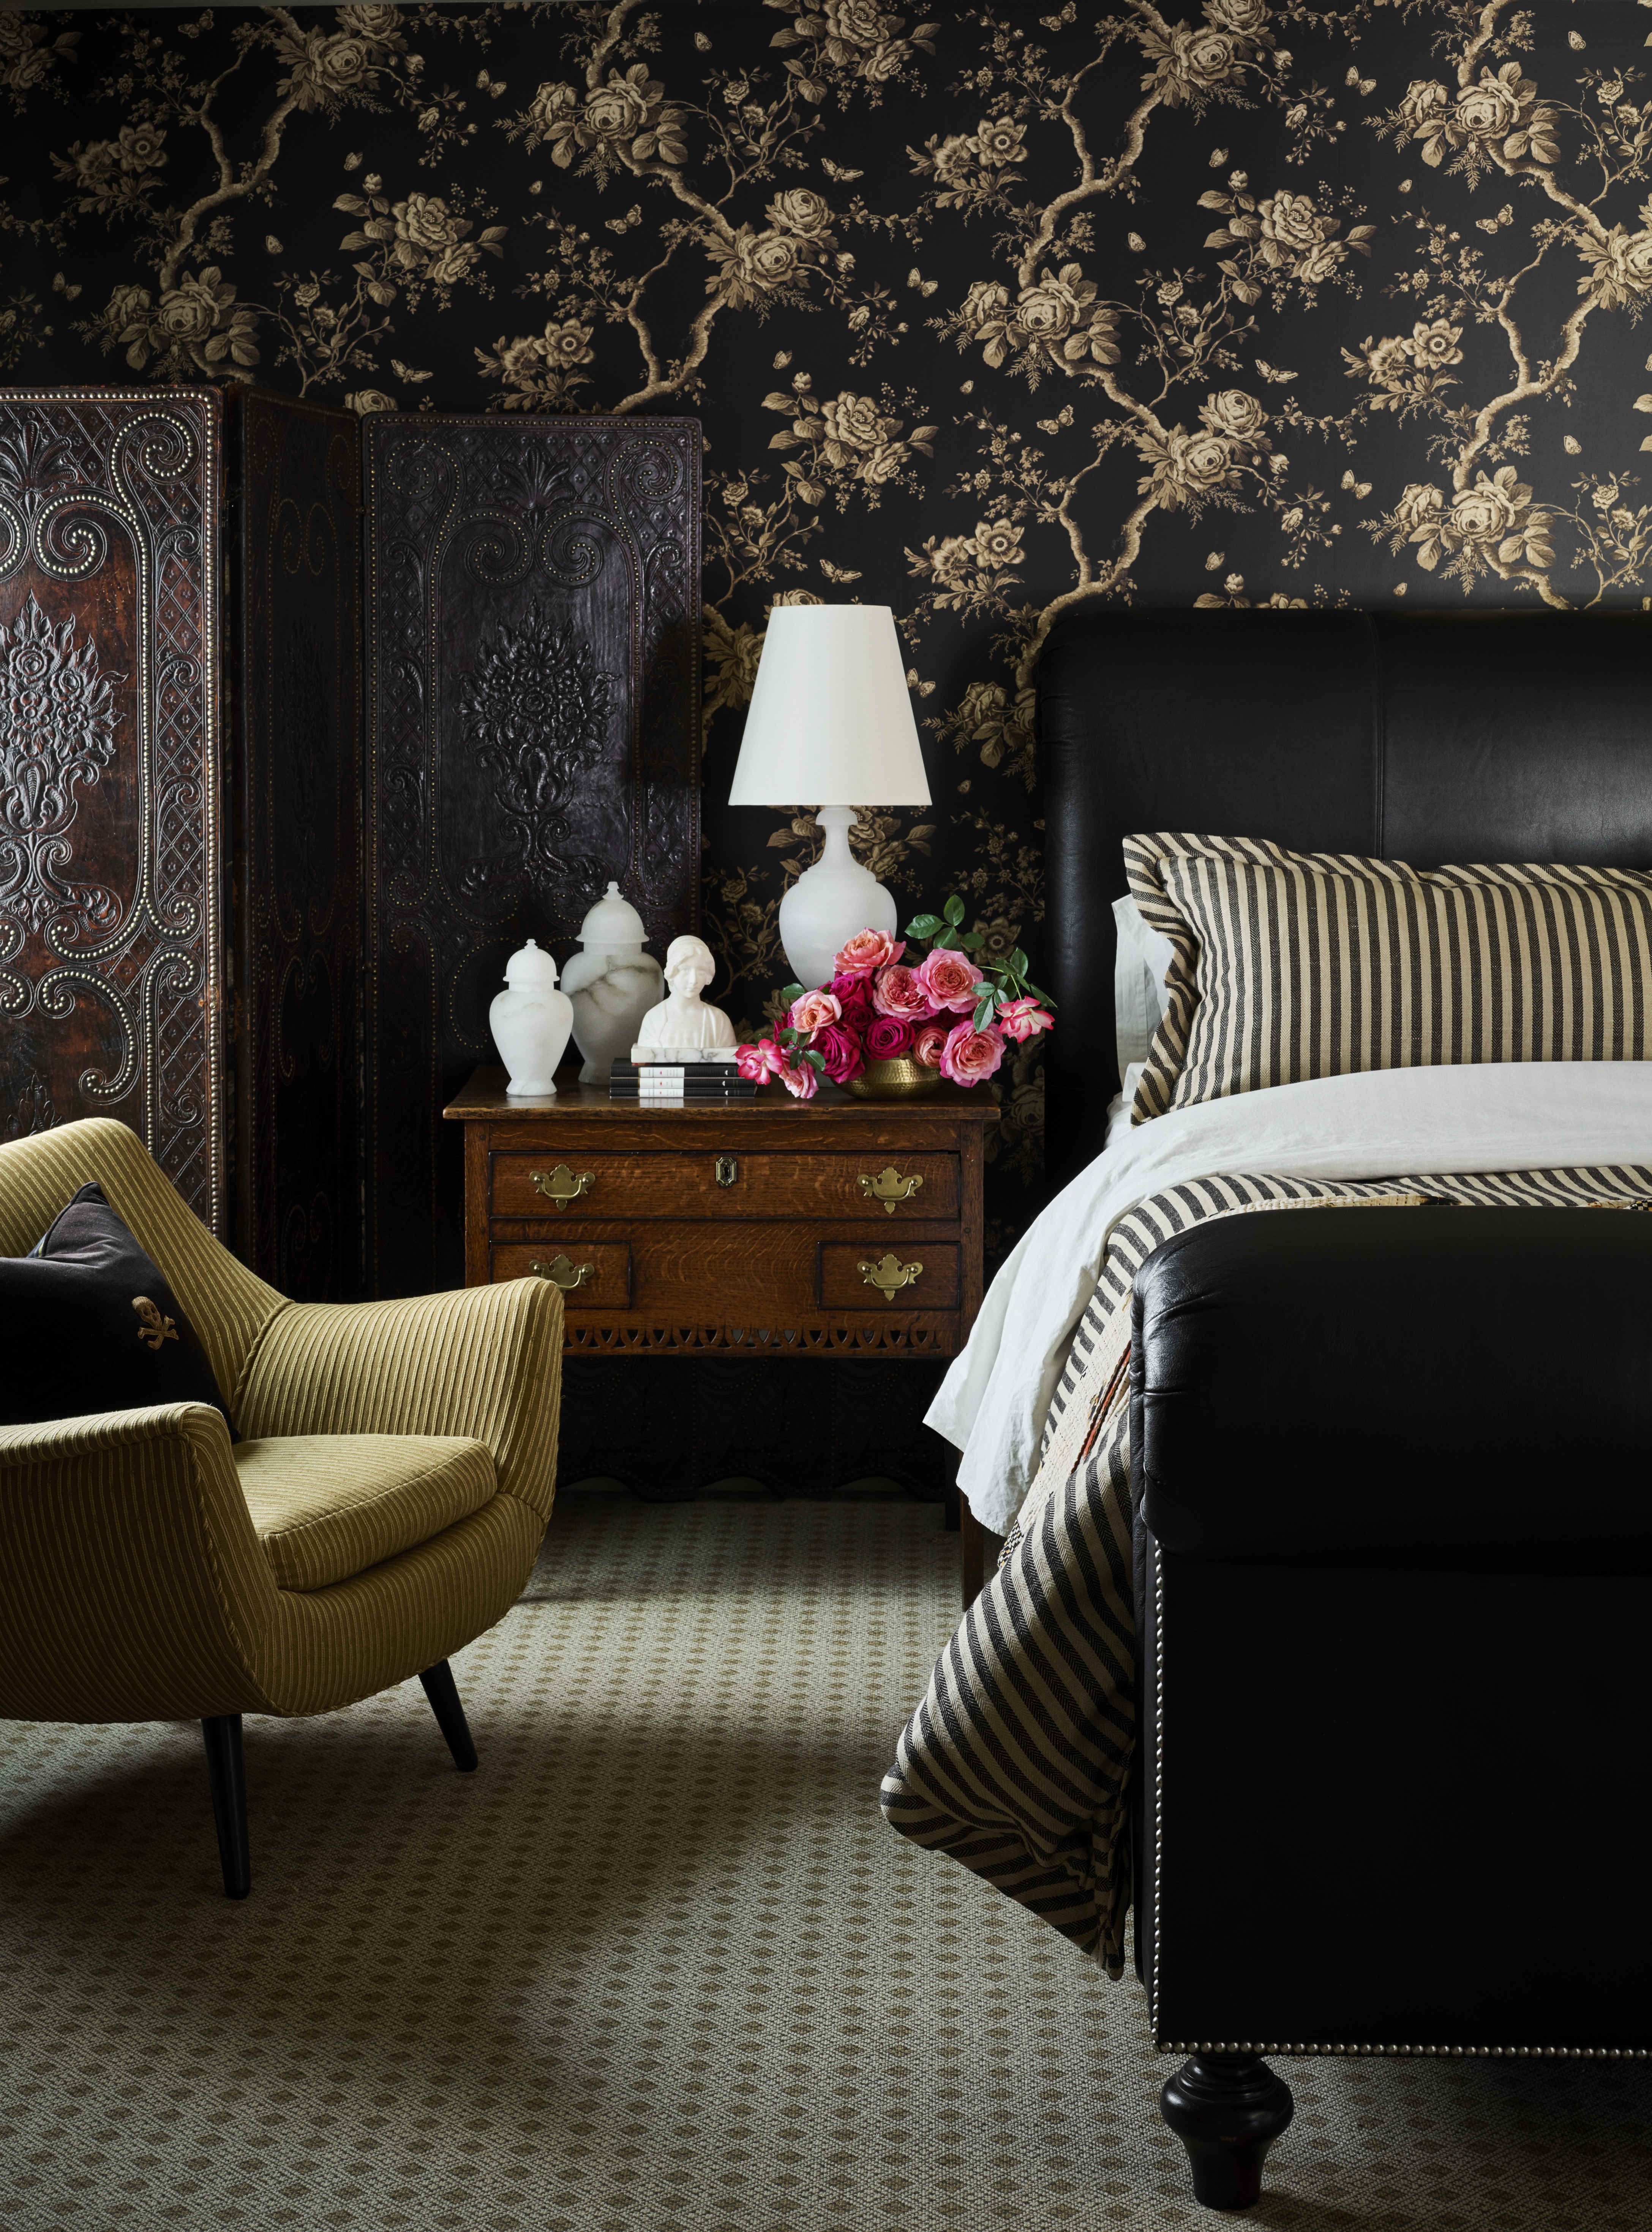 Susan E. Brown, Interior Design | Why Black Wallpaper Is all the Rage